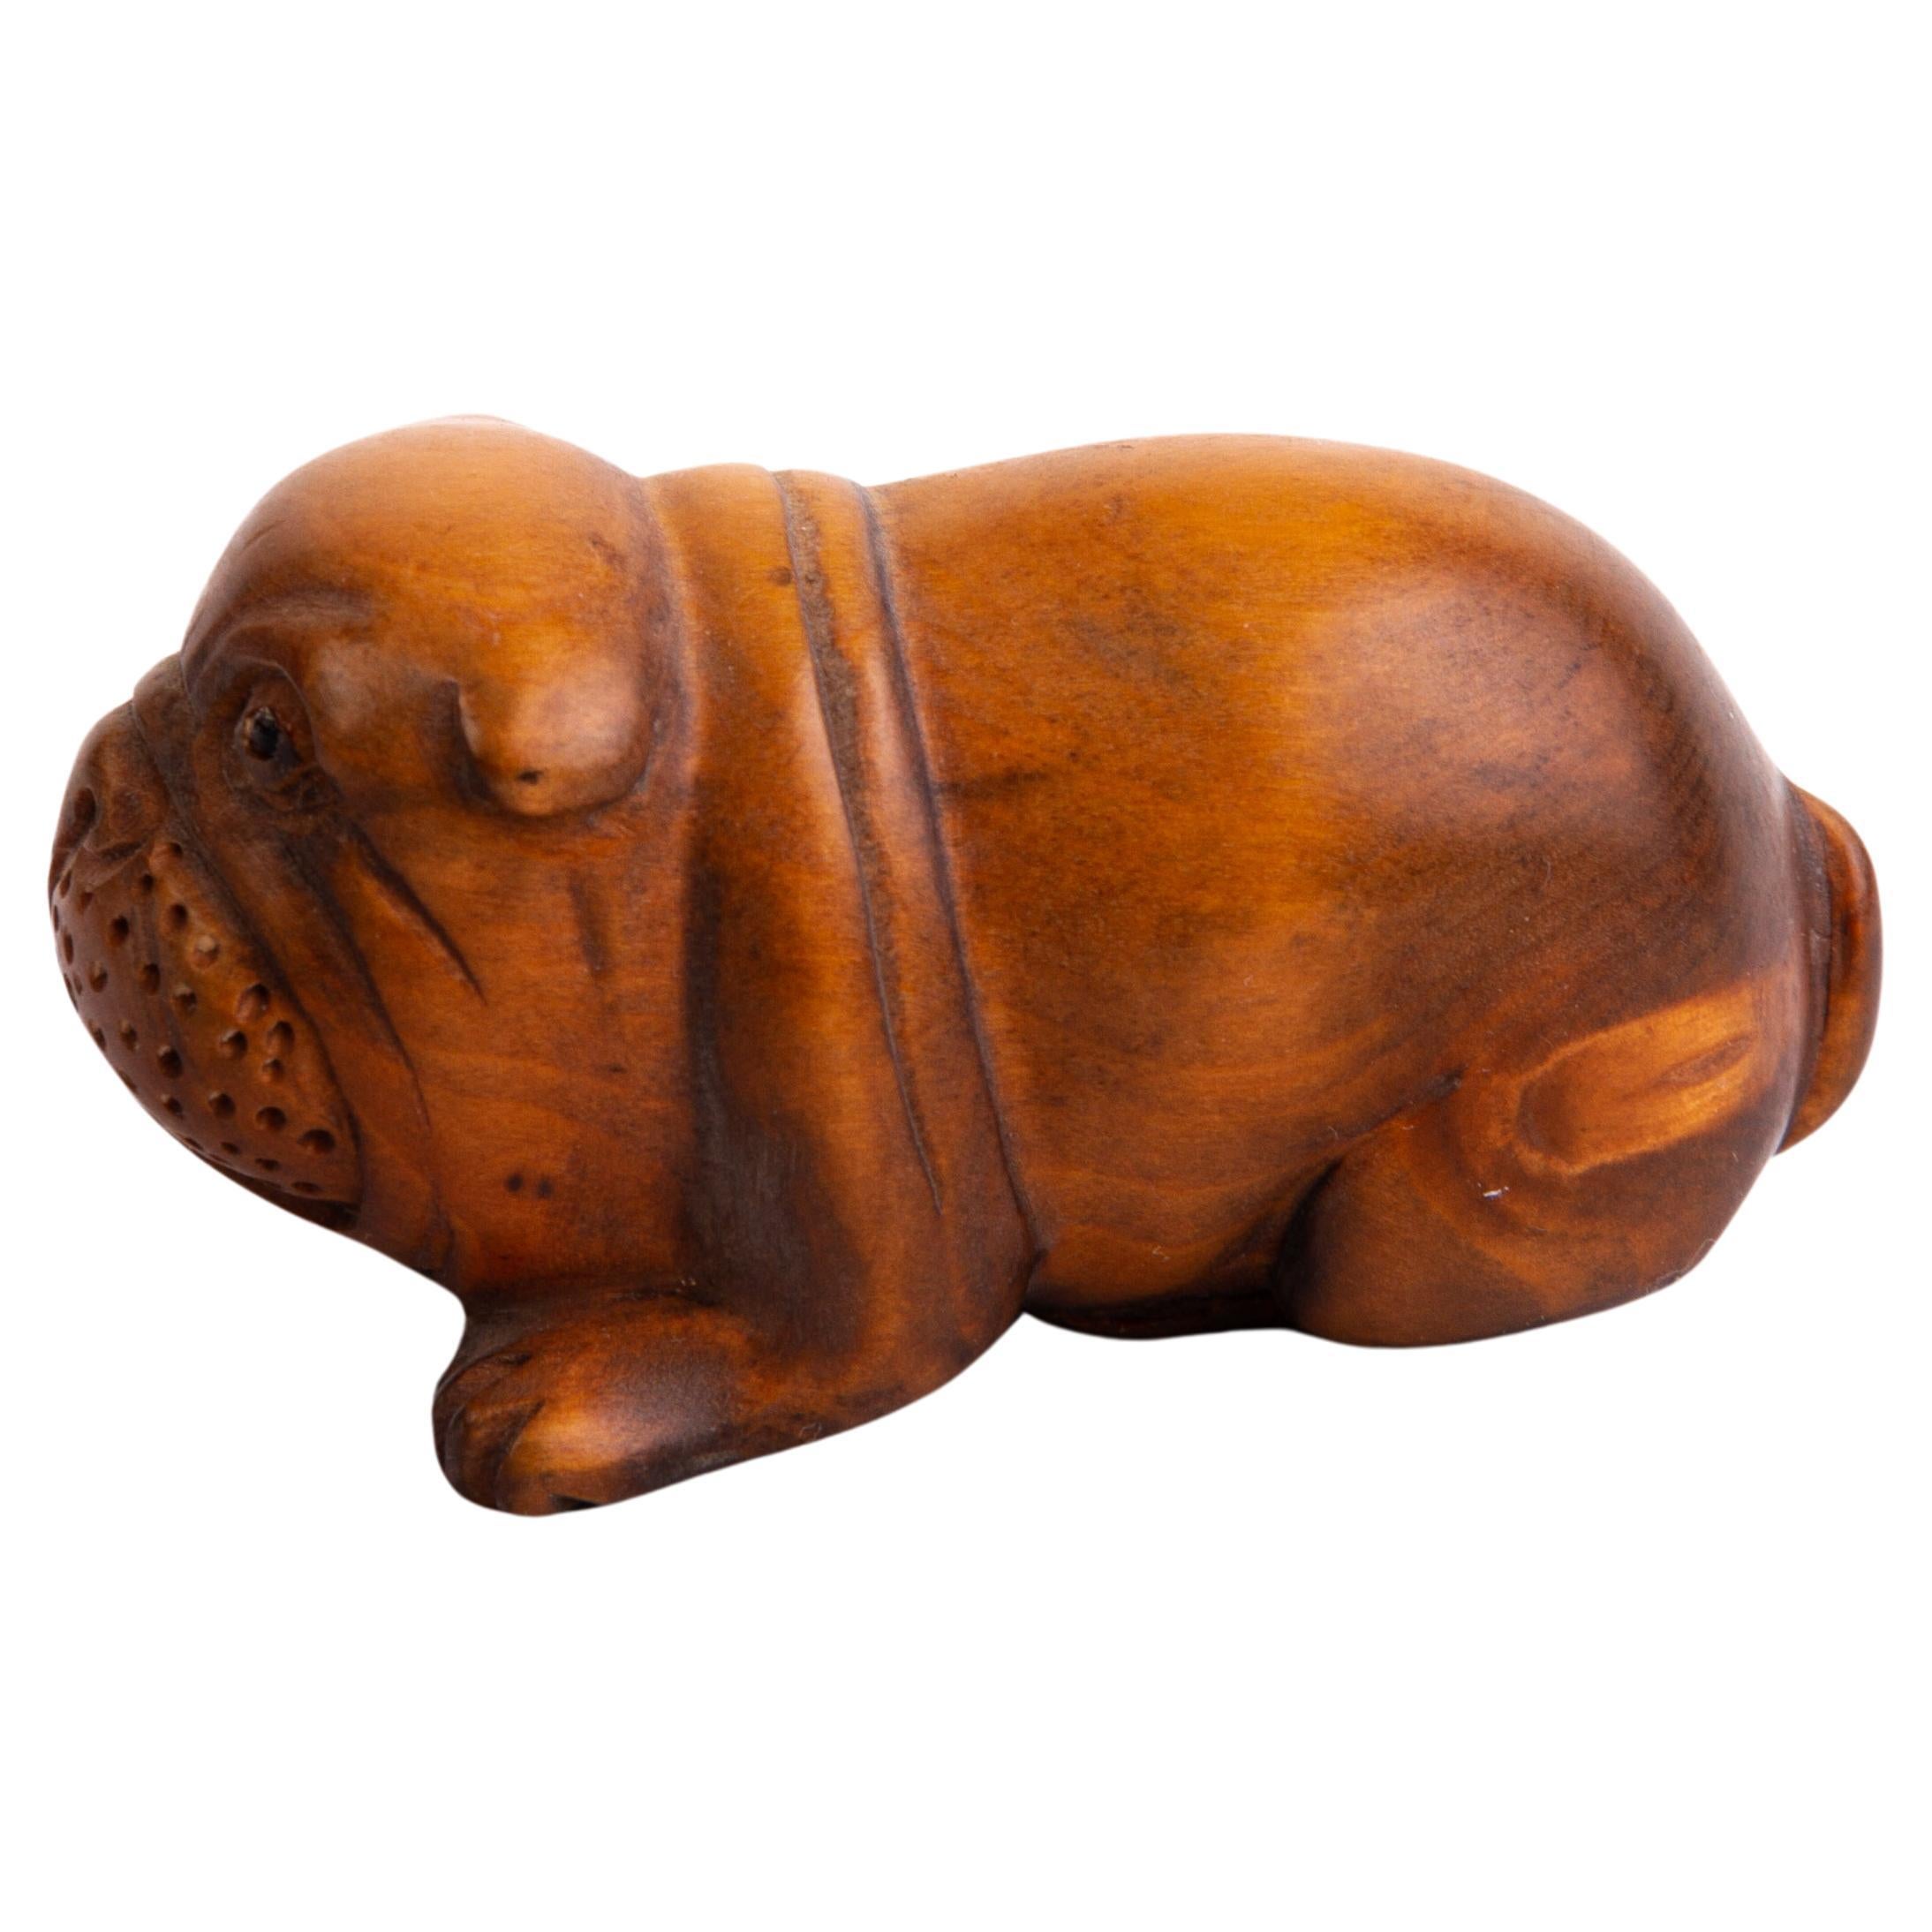 In good condition
From a private collection
Free international shipping
Signed Japanese Boxwood Netsuke Inro of a Dog 